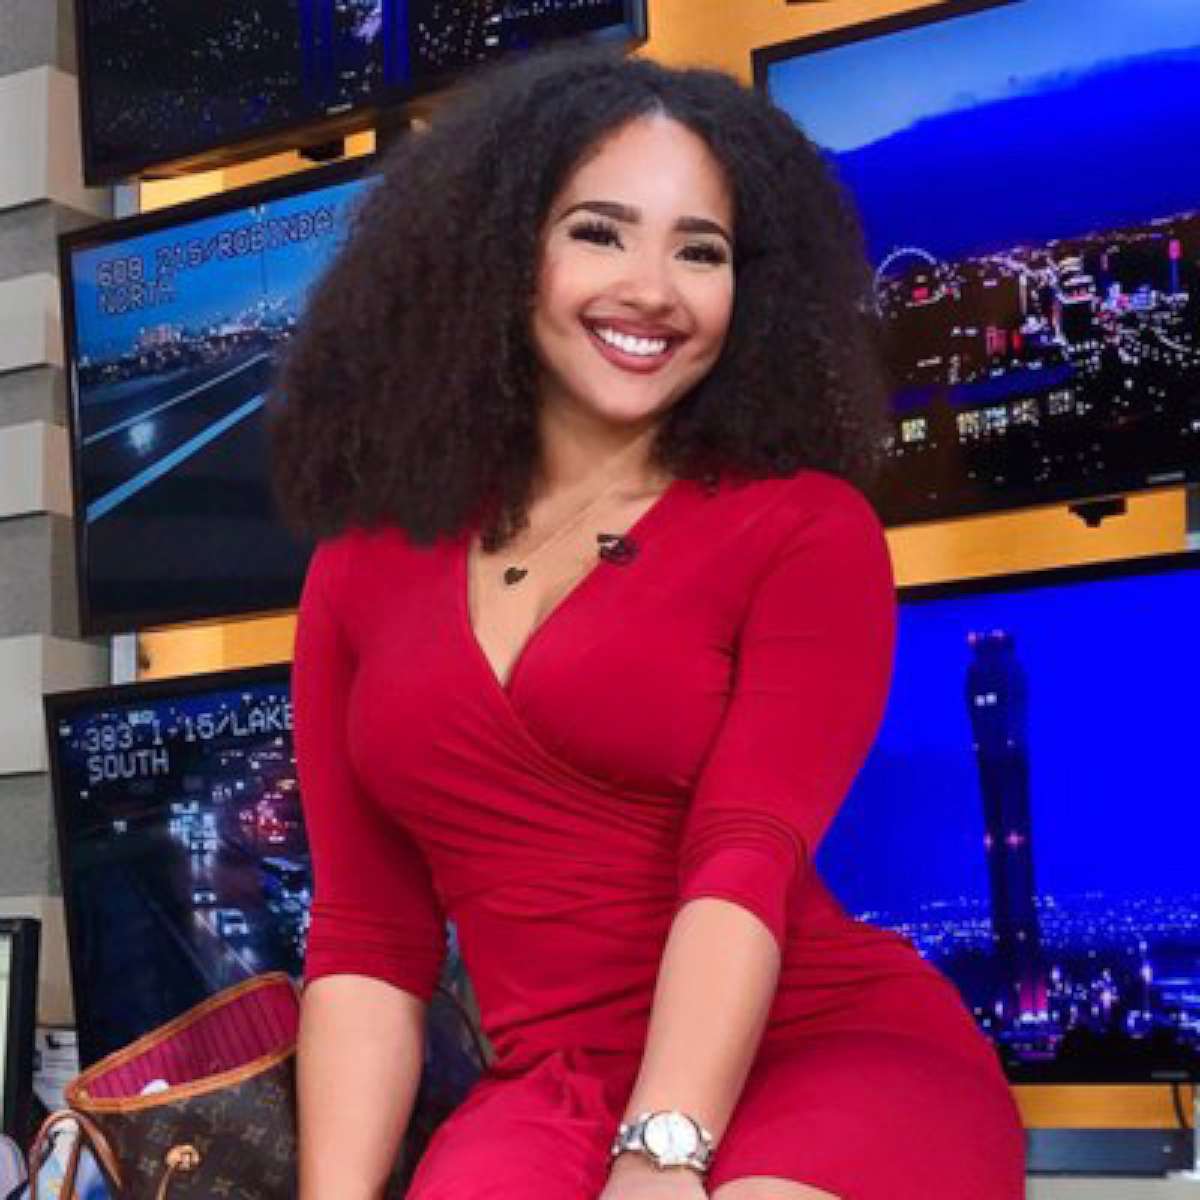 PHOTO: WFAA traffic reporter Demetria Obilor is pictured in this Twitter profile photo.